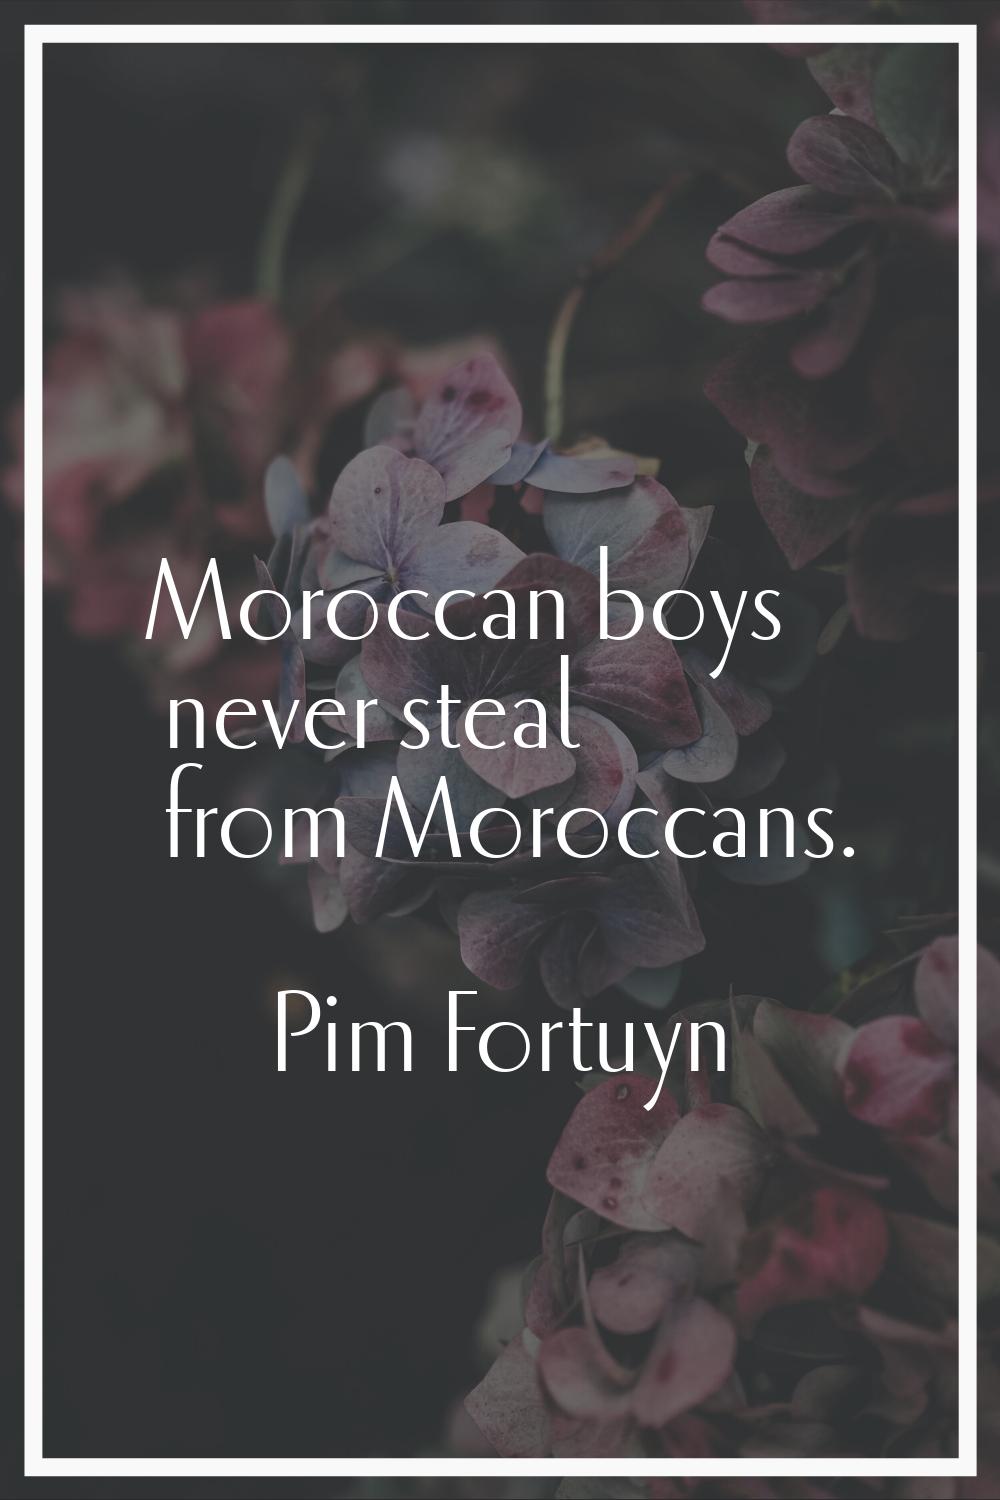 Moroccan boys never steal from Moroccans.